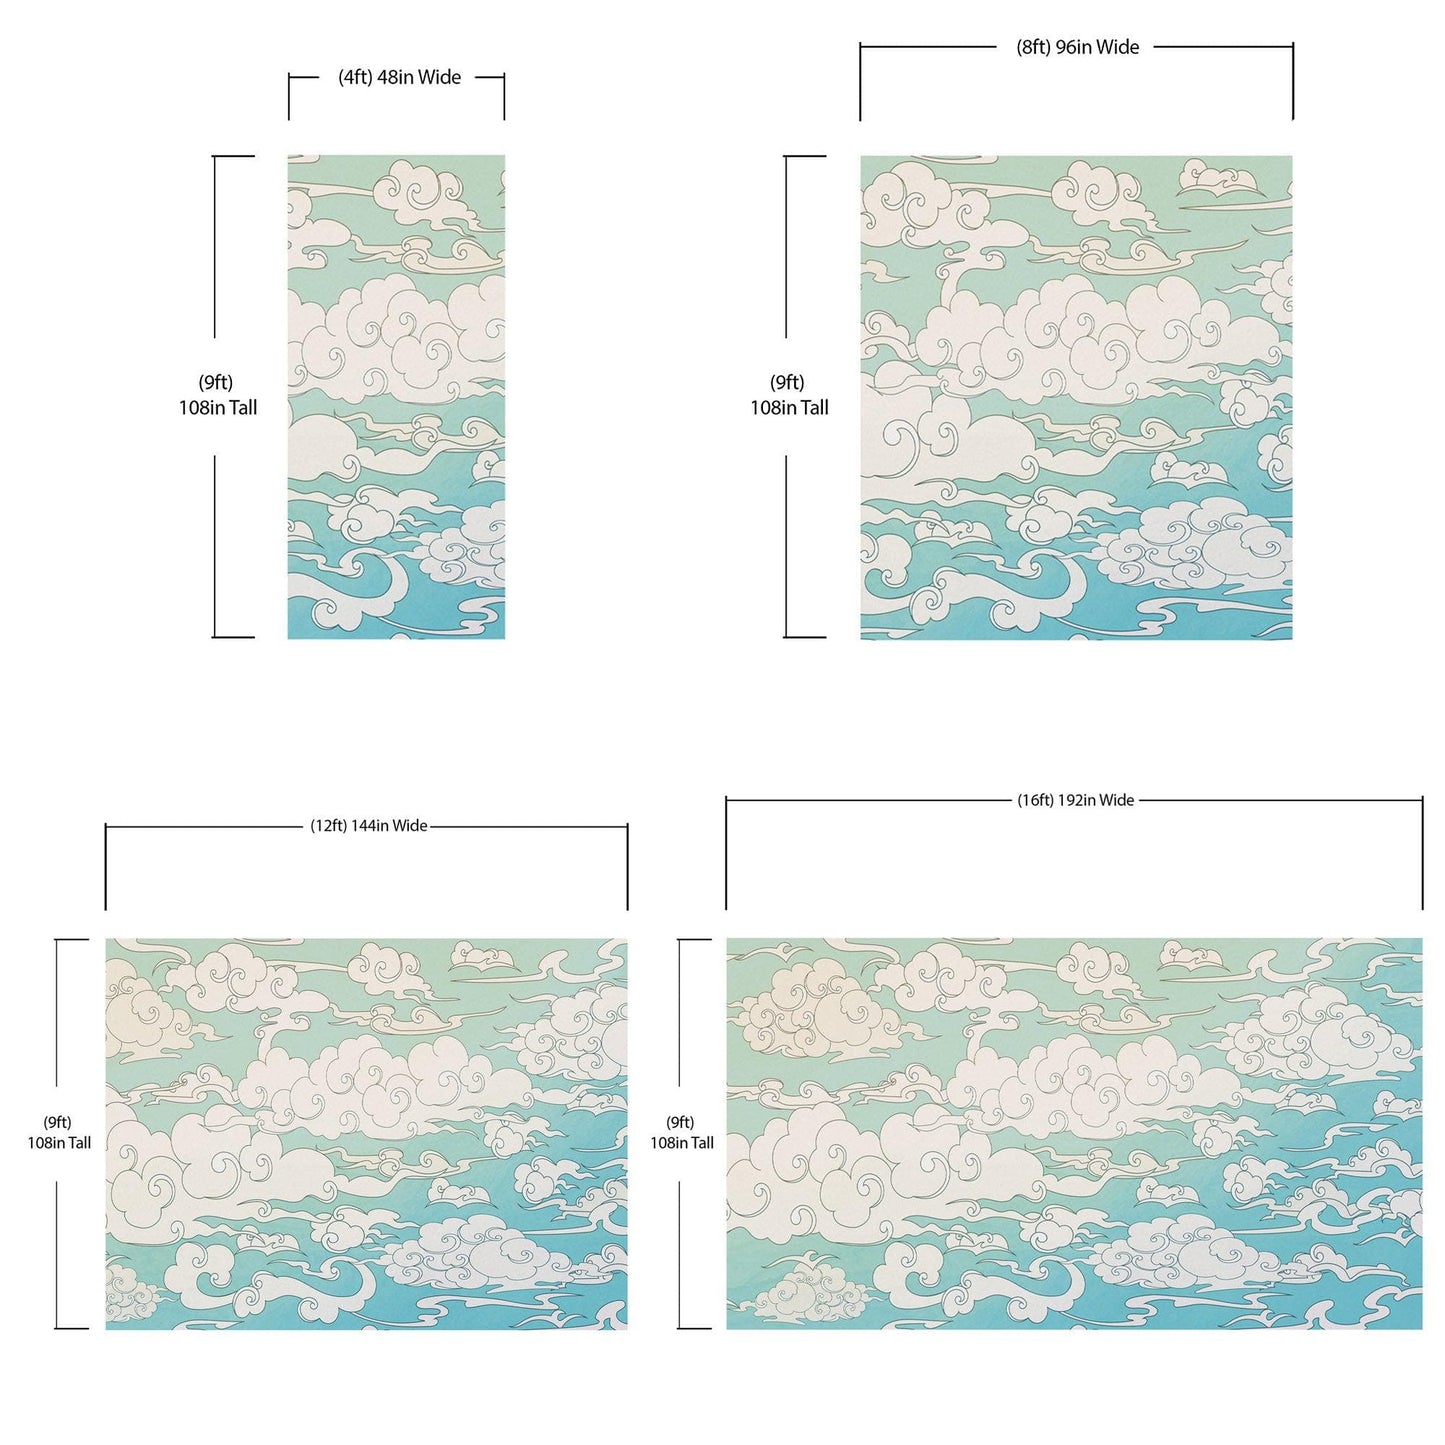 Japanese Traditional Curly Cloud in Sky Abstract Illustration Asian Decor Wall Mural. Peel and Stick Wallpaper. #6297